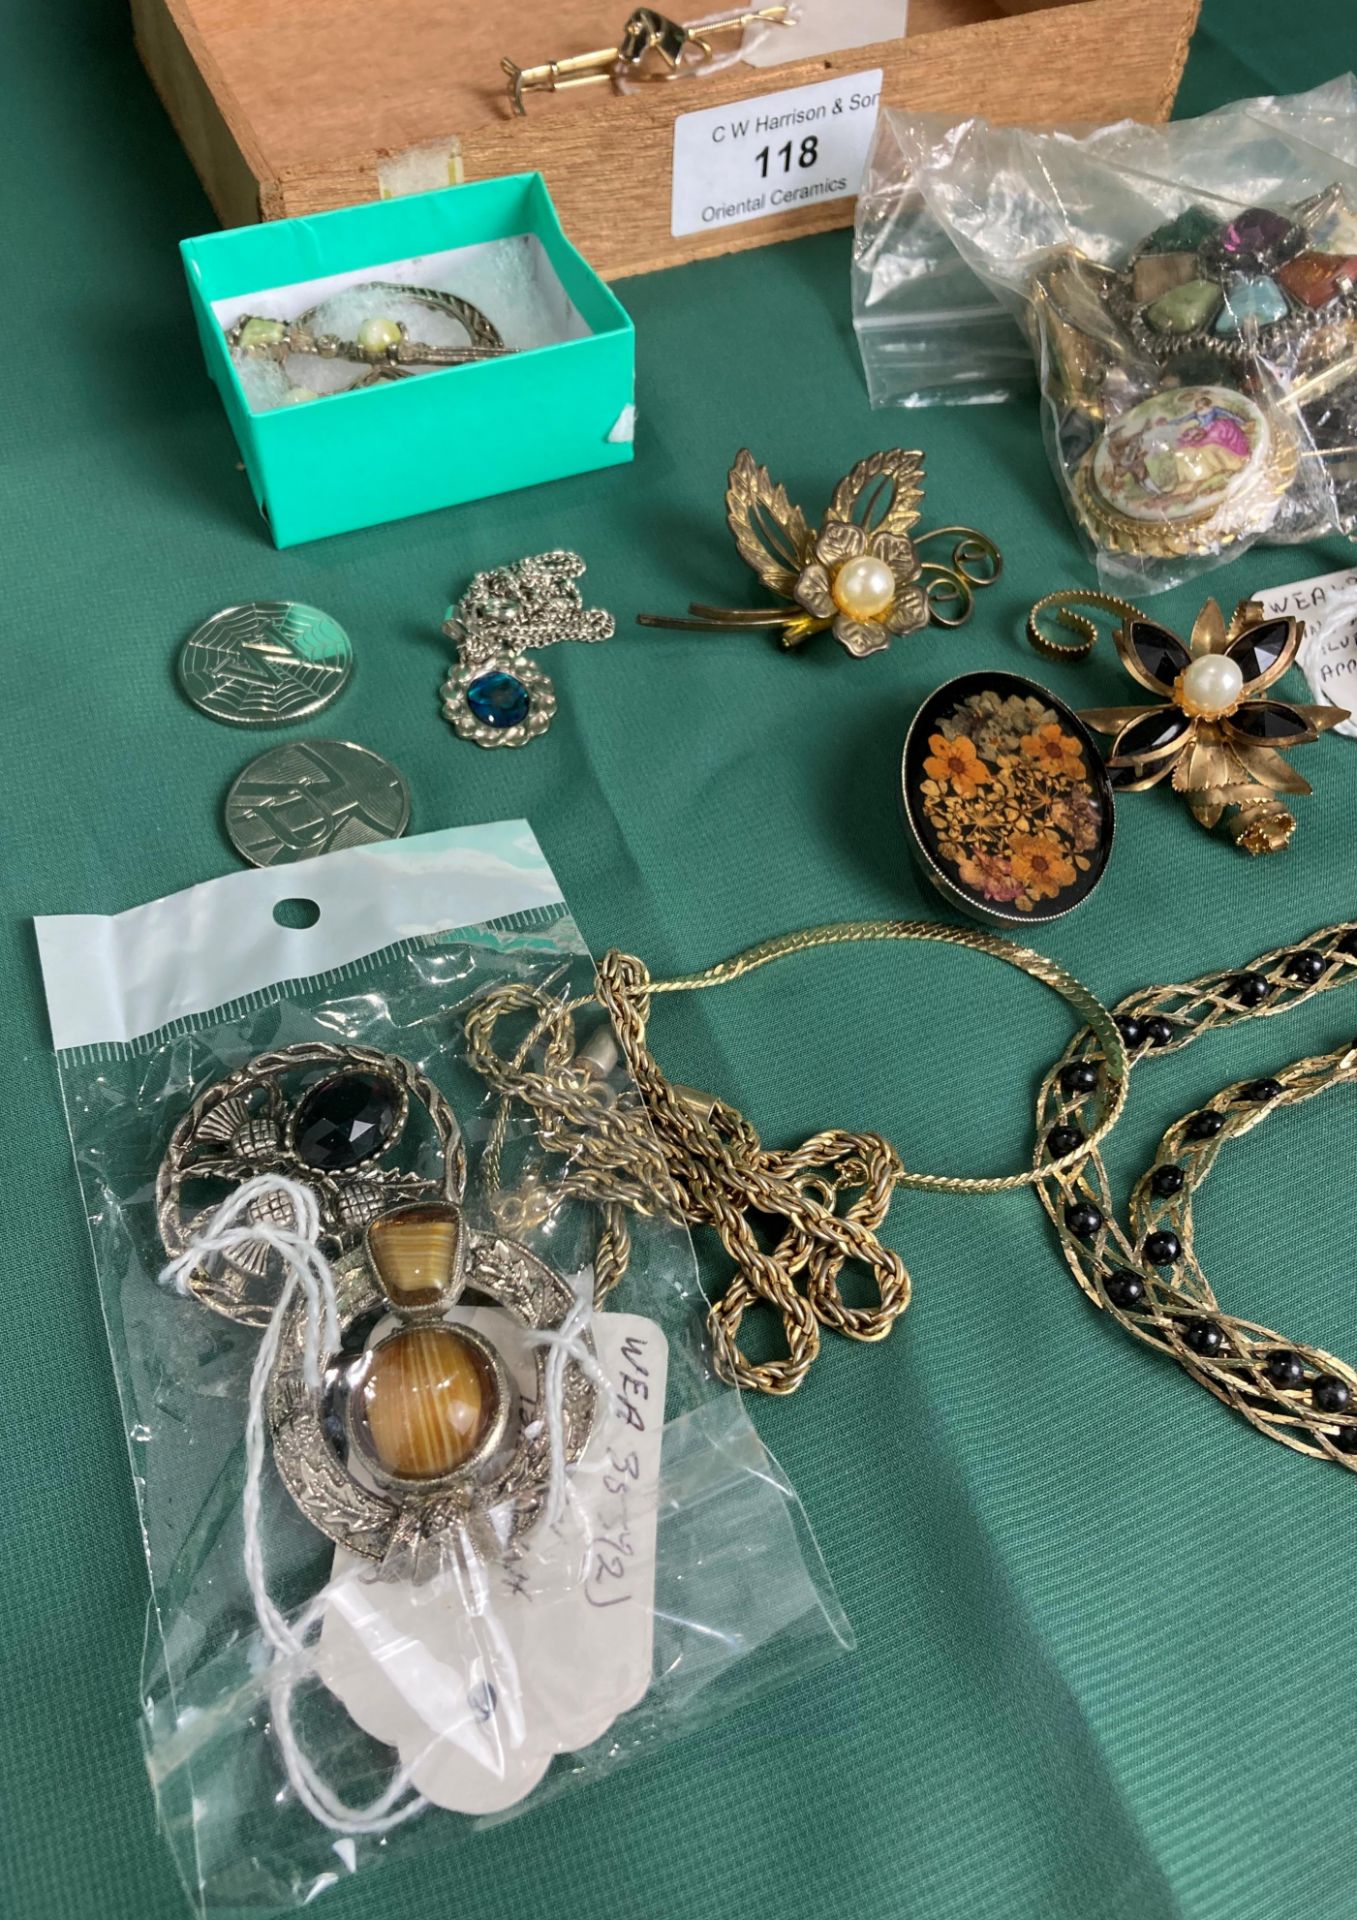 Contents to cigar box - assorted costume jewellery including Scottish brooches, chains, - Image 2 of 4